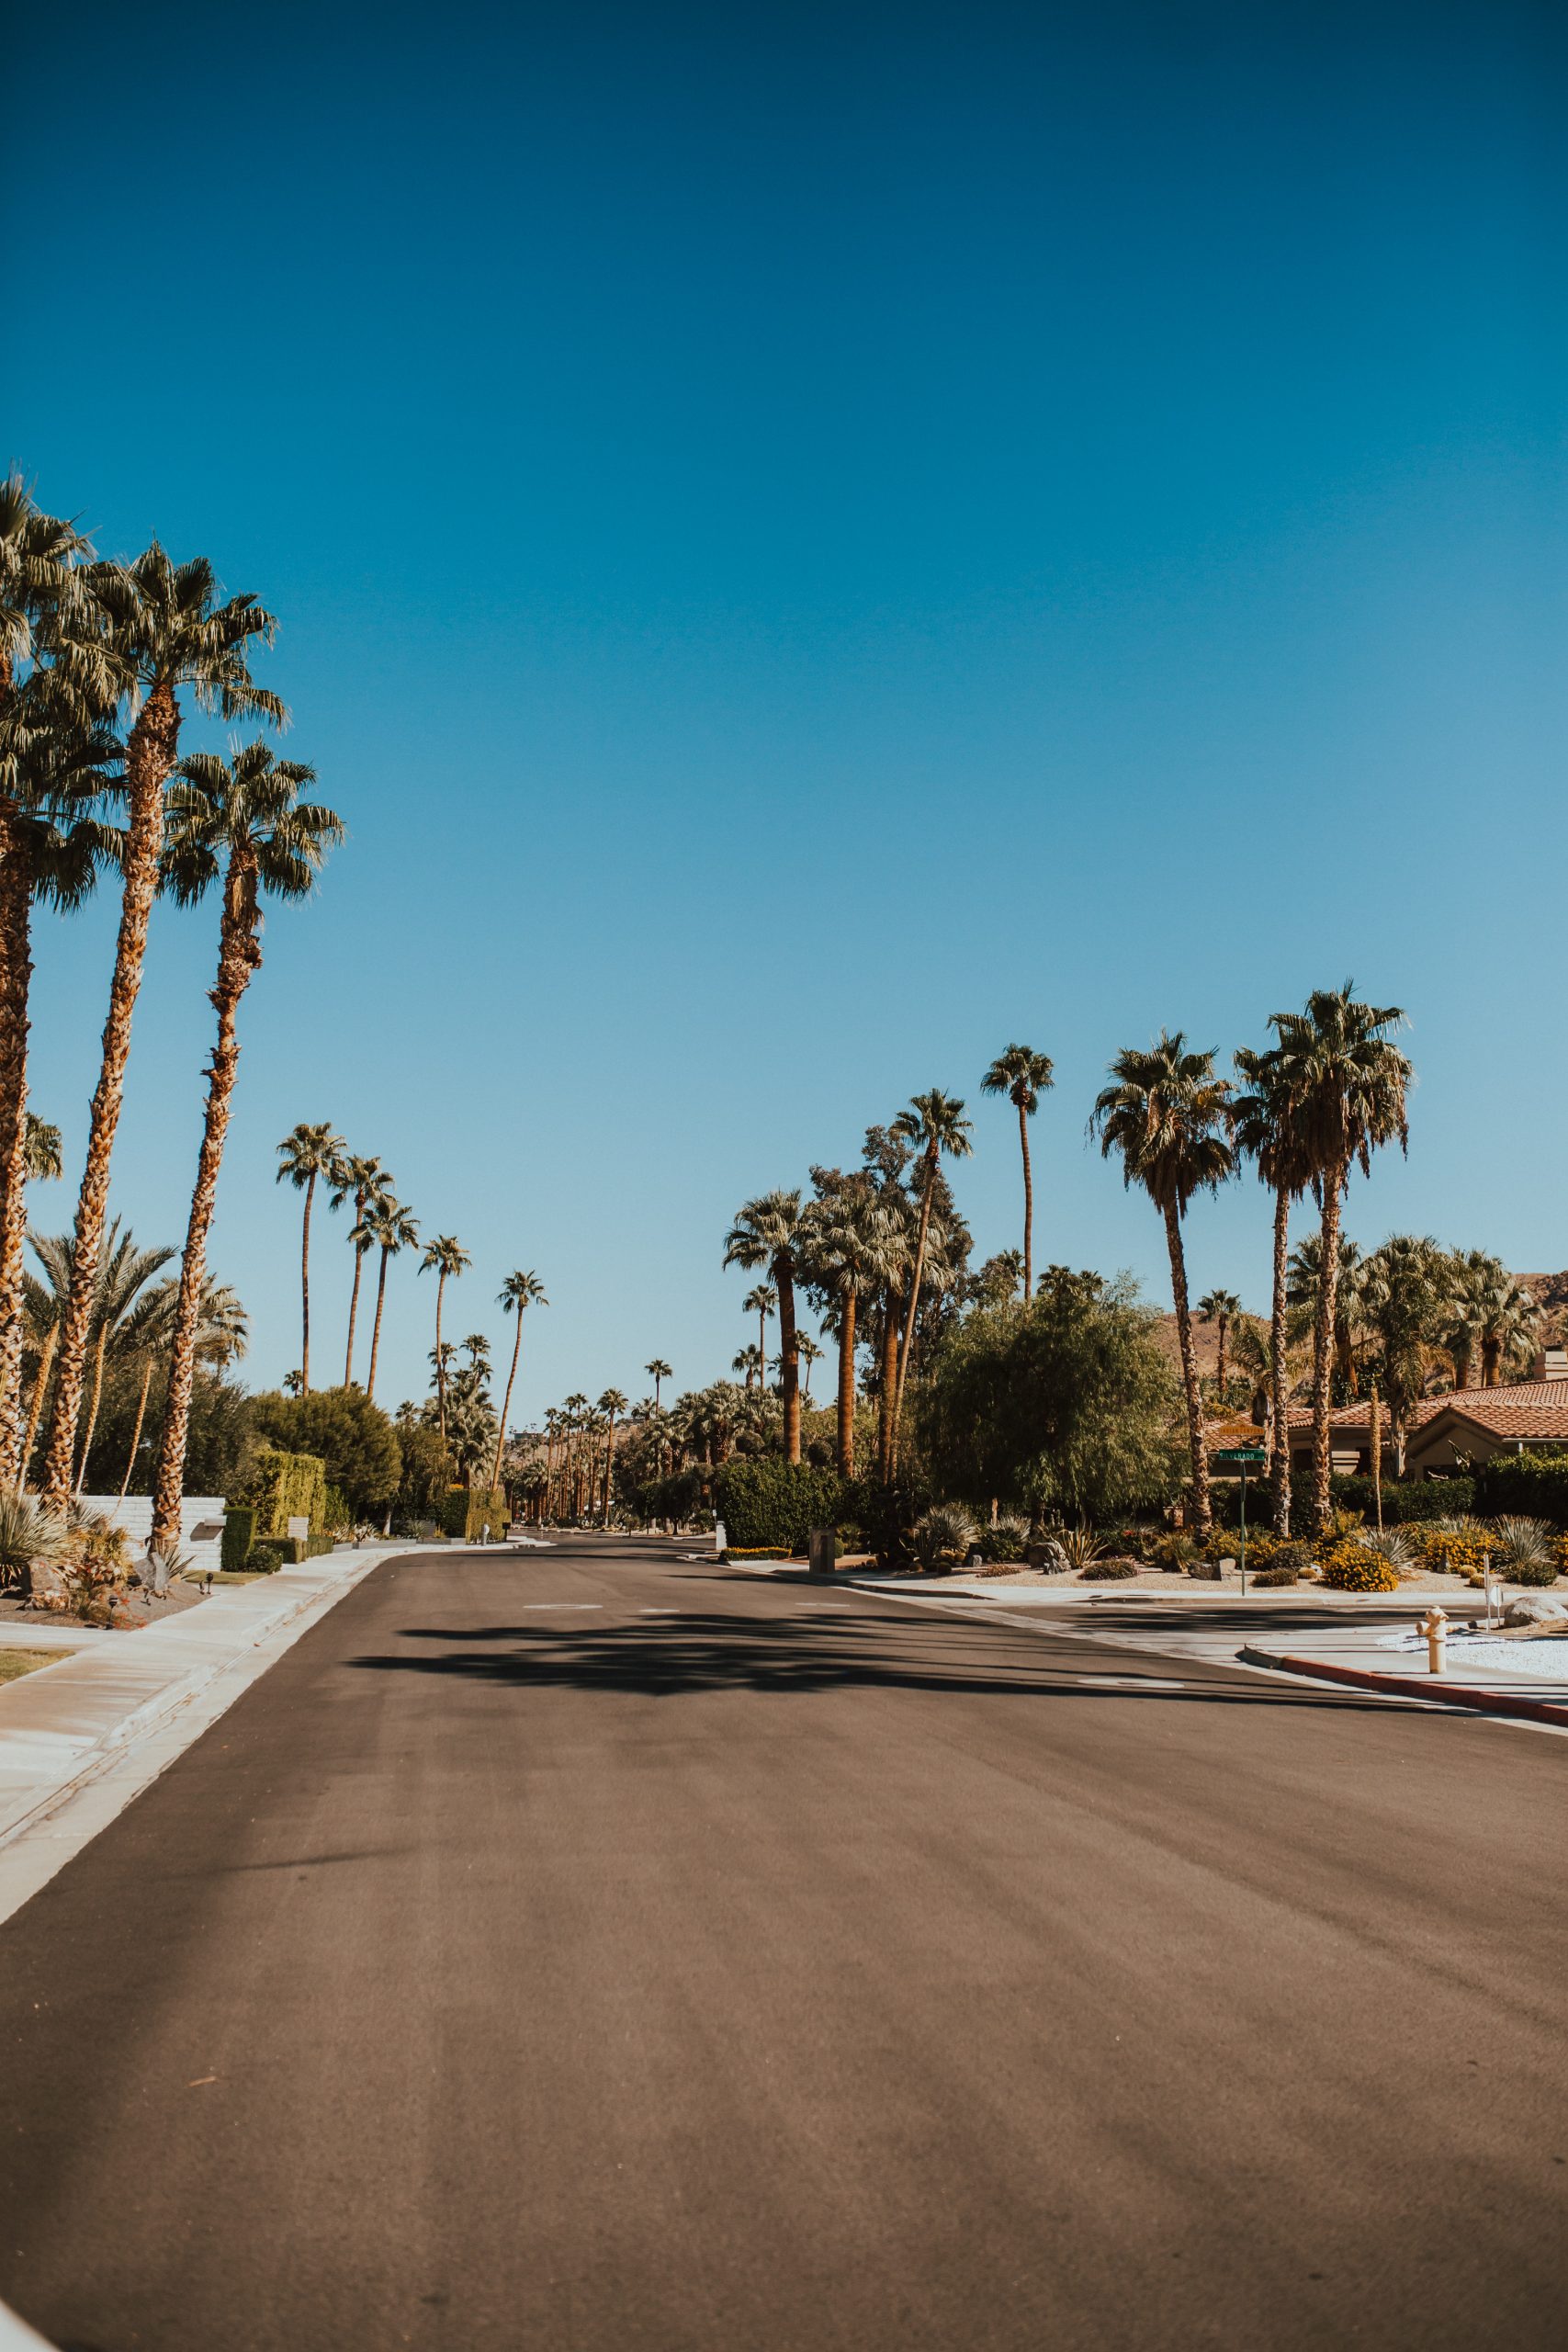 A street in South Palm Springs